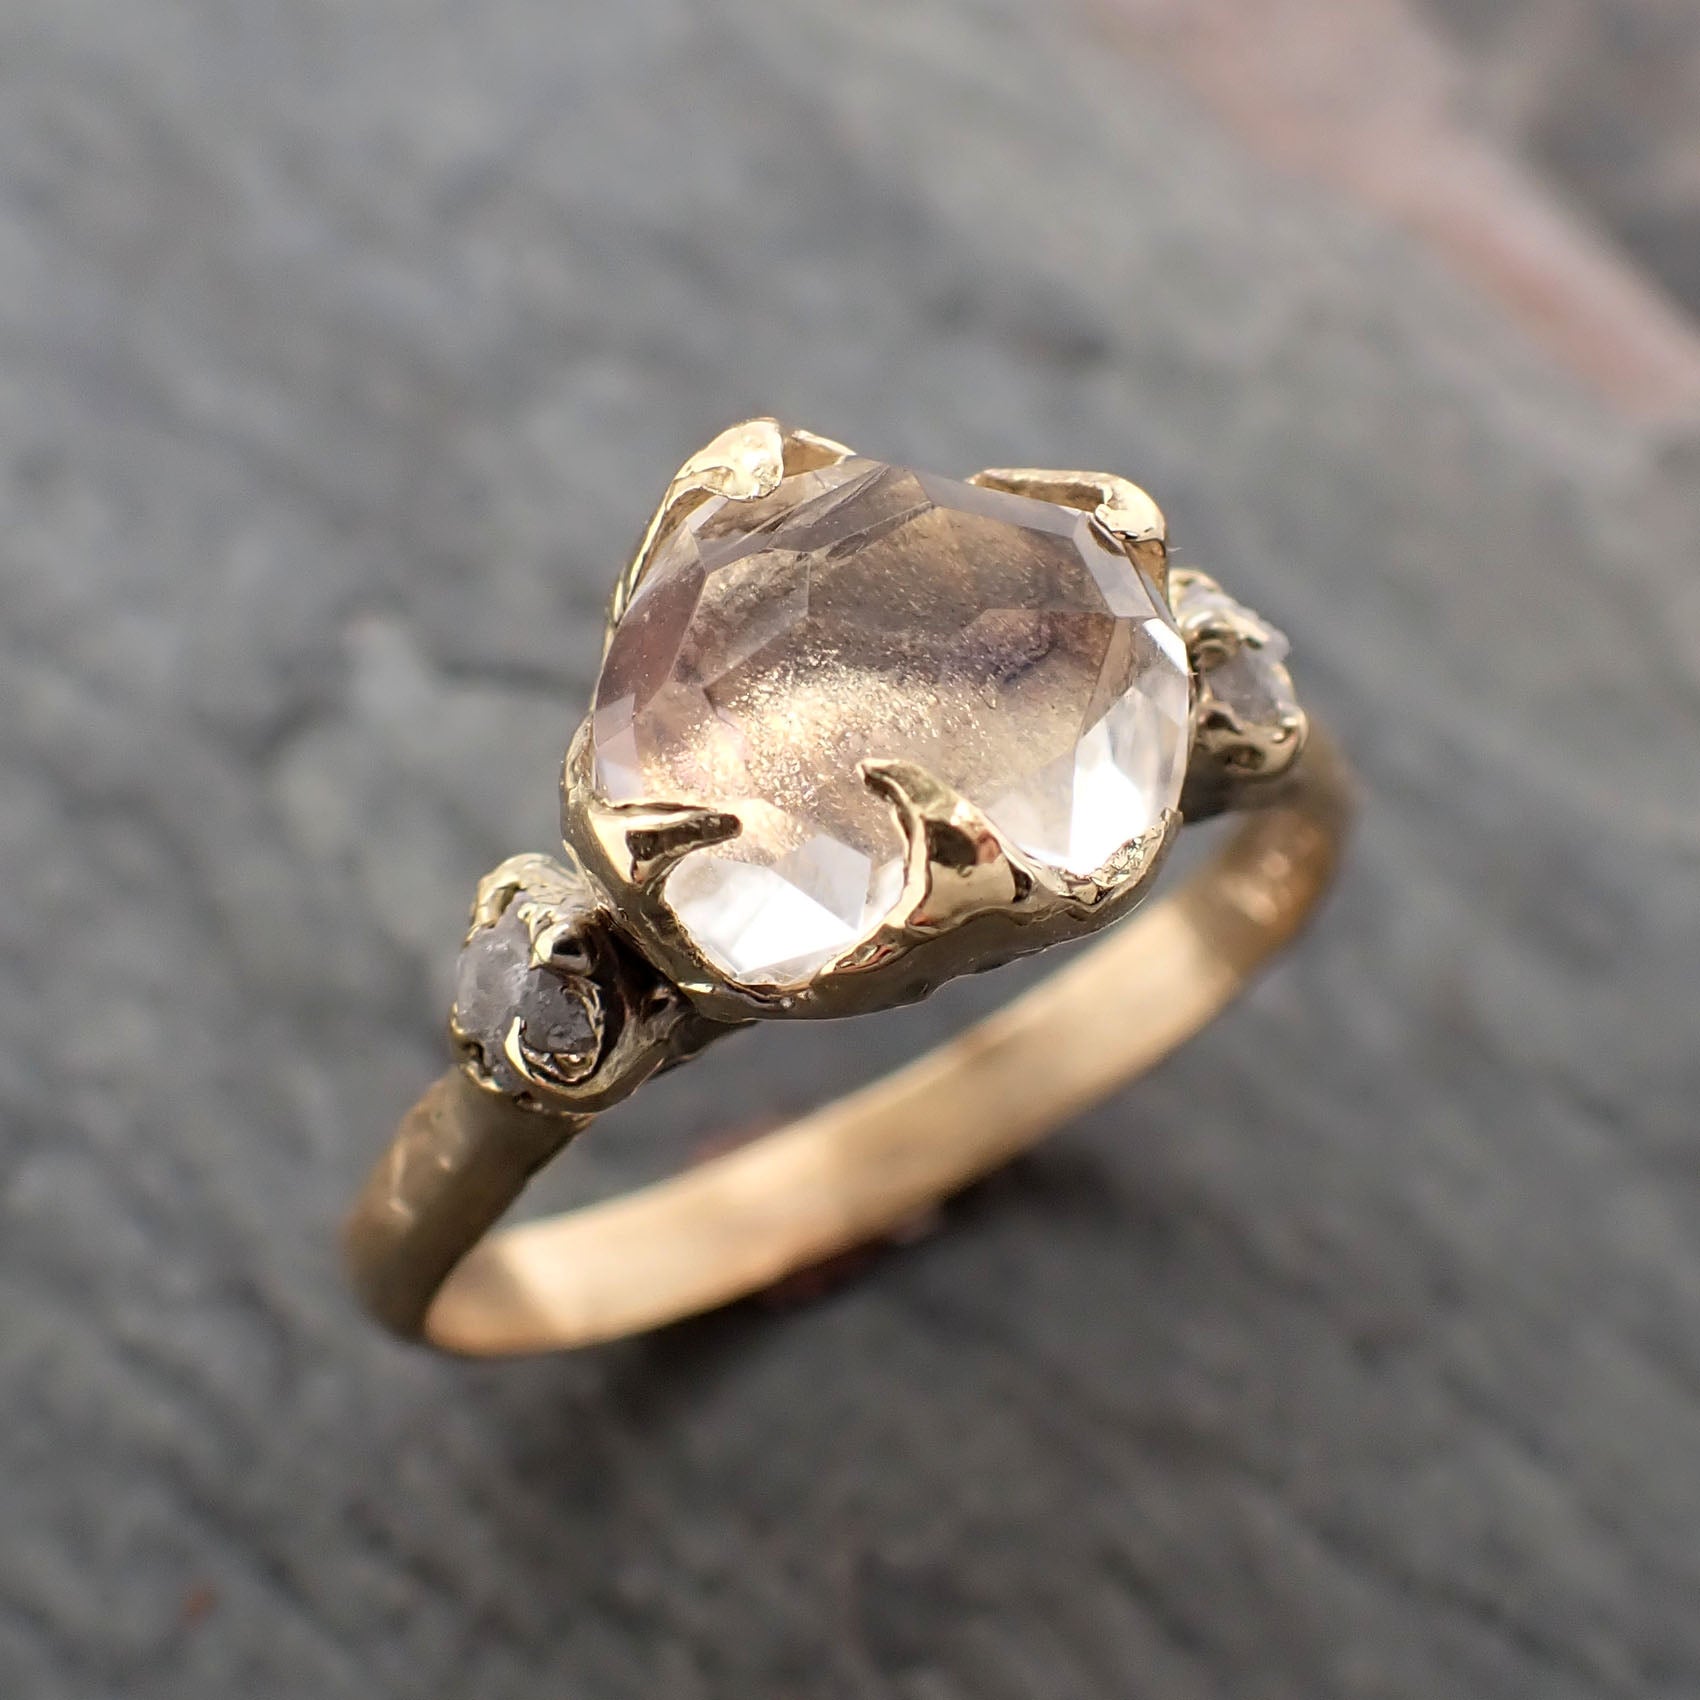 partially faceted moonstone rough diamond 18k gold ring gemstone multi stone recycled 2360 Alternative Engagement